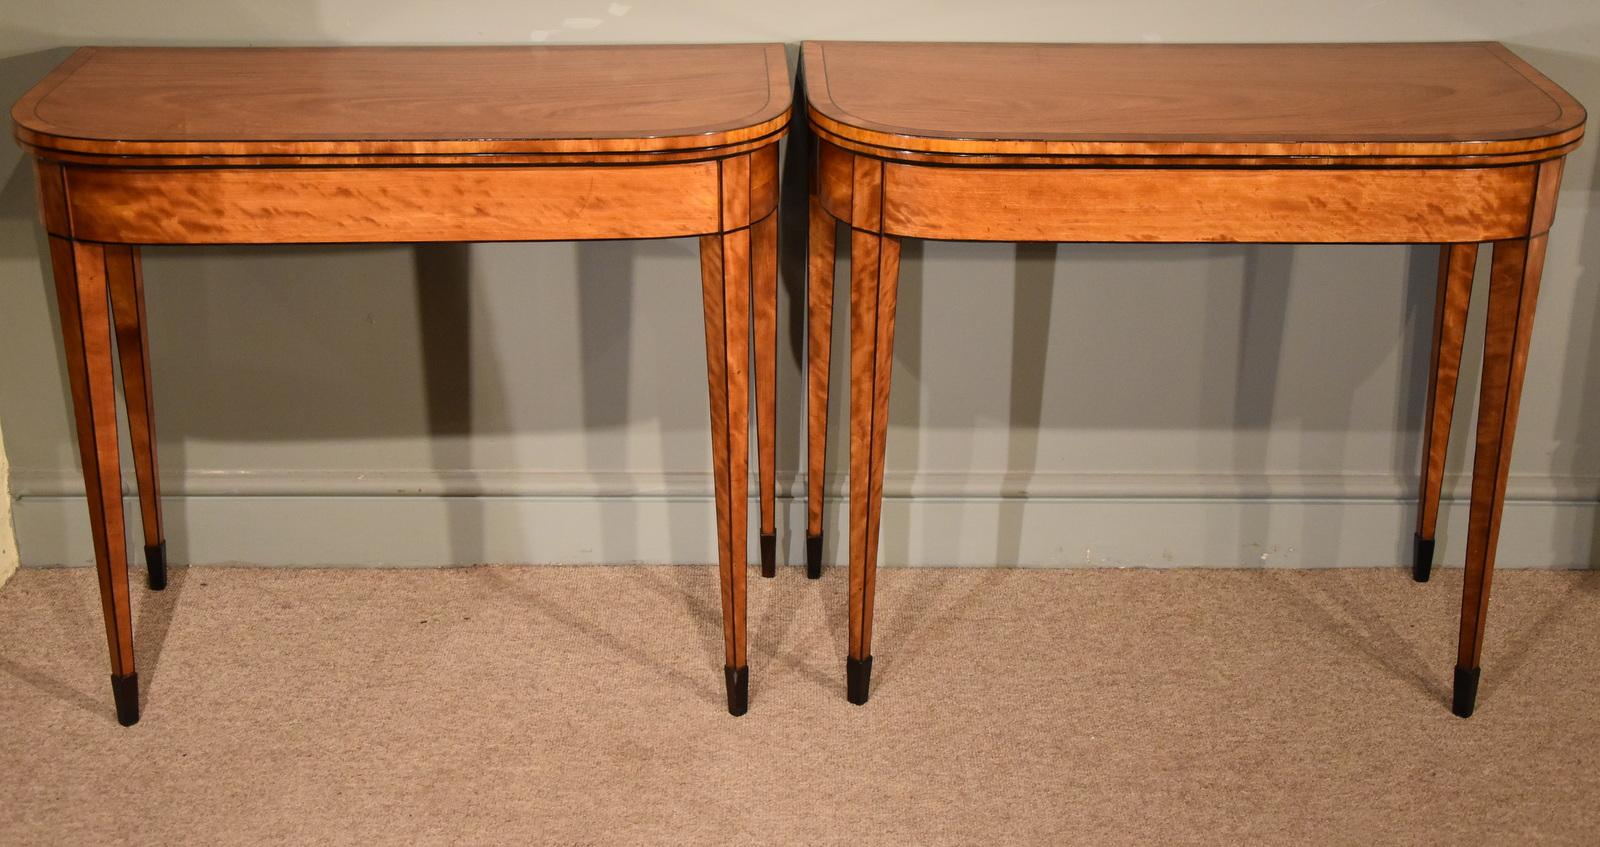 A fine pair of late 18th century satinwood card tables, circa 1785.

Measures: Height 30